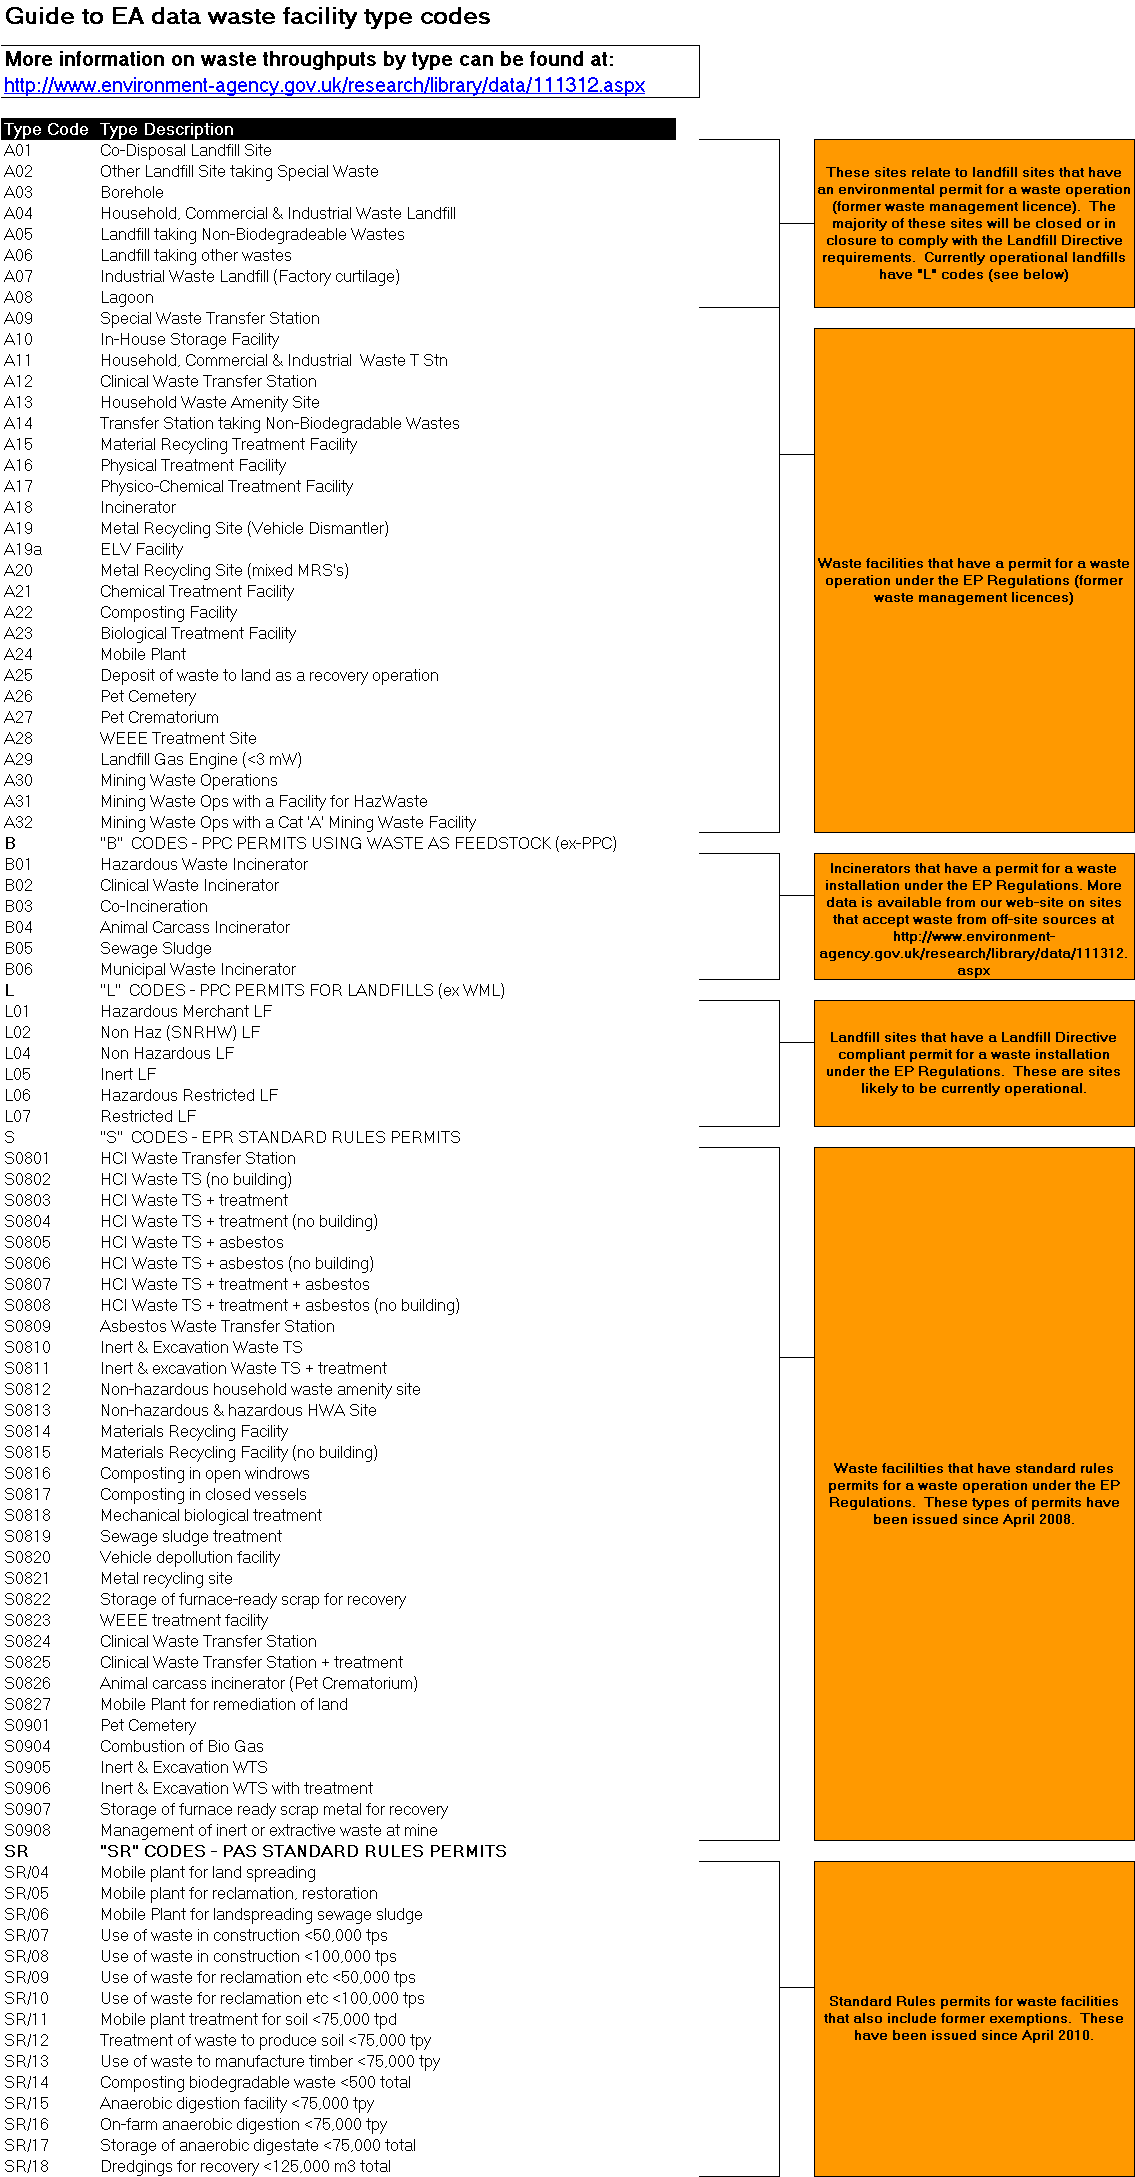 Guide to EA data waste facility type codes